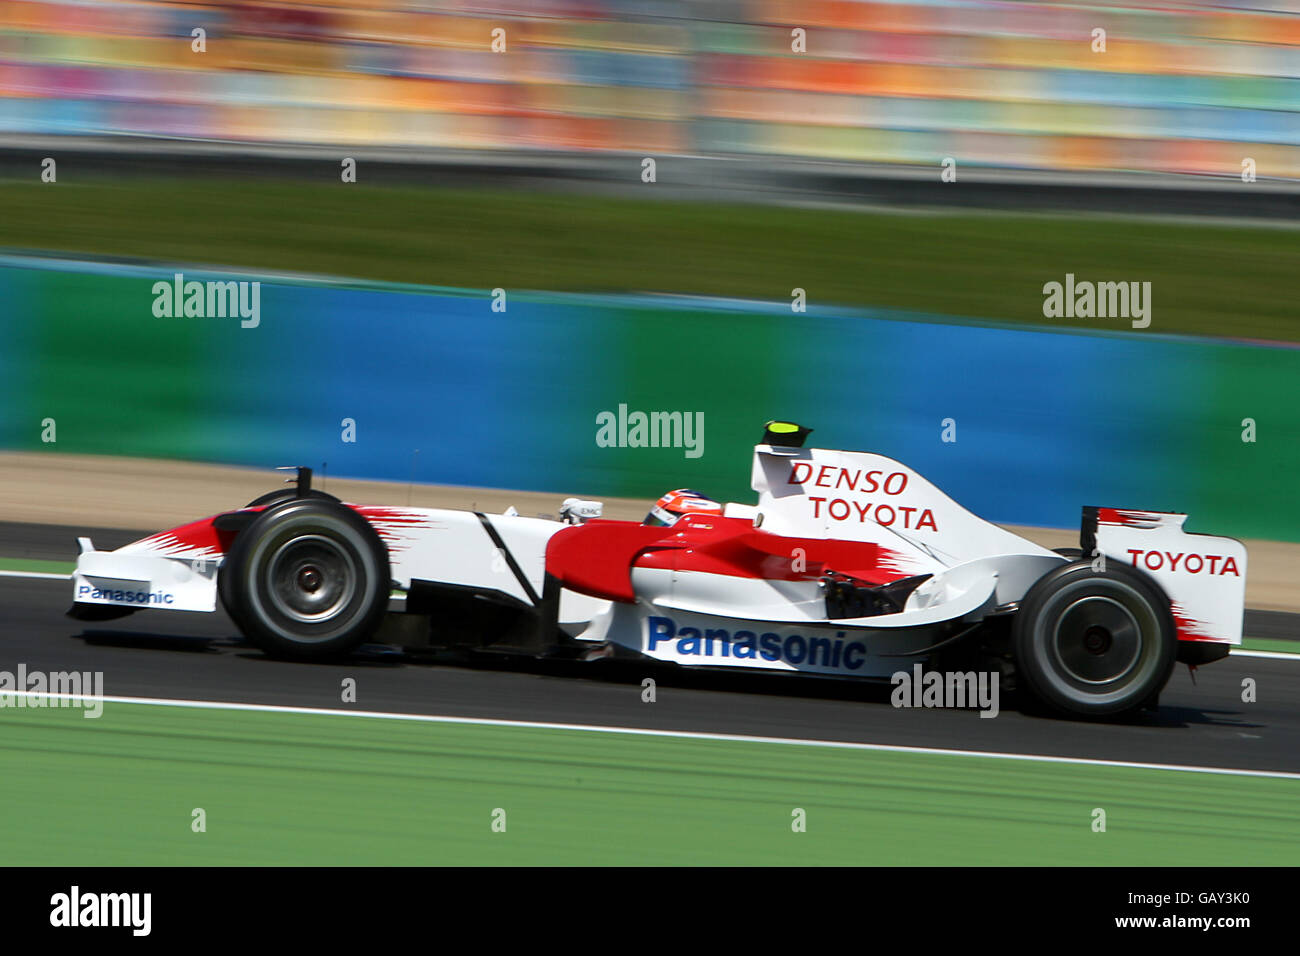 Formula One Motor Racing - French Grand Prix - Qualifying - Magny Cours. Toyota's Timo Glock during qualifying for the Grand Prix at Magny-Cours, Nevers, France. Stock Photo